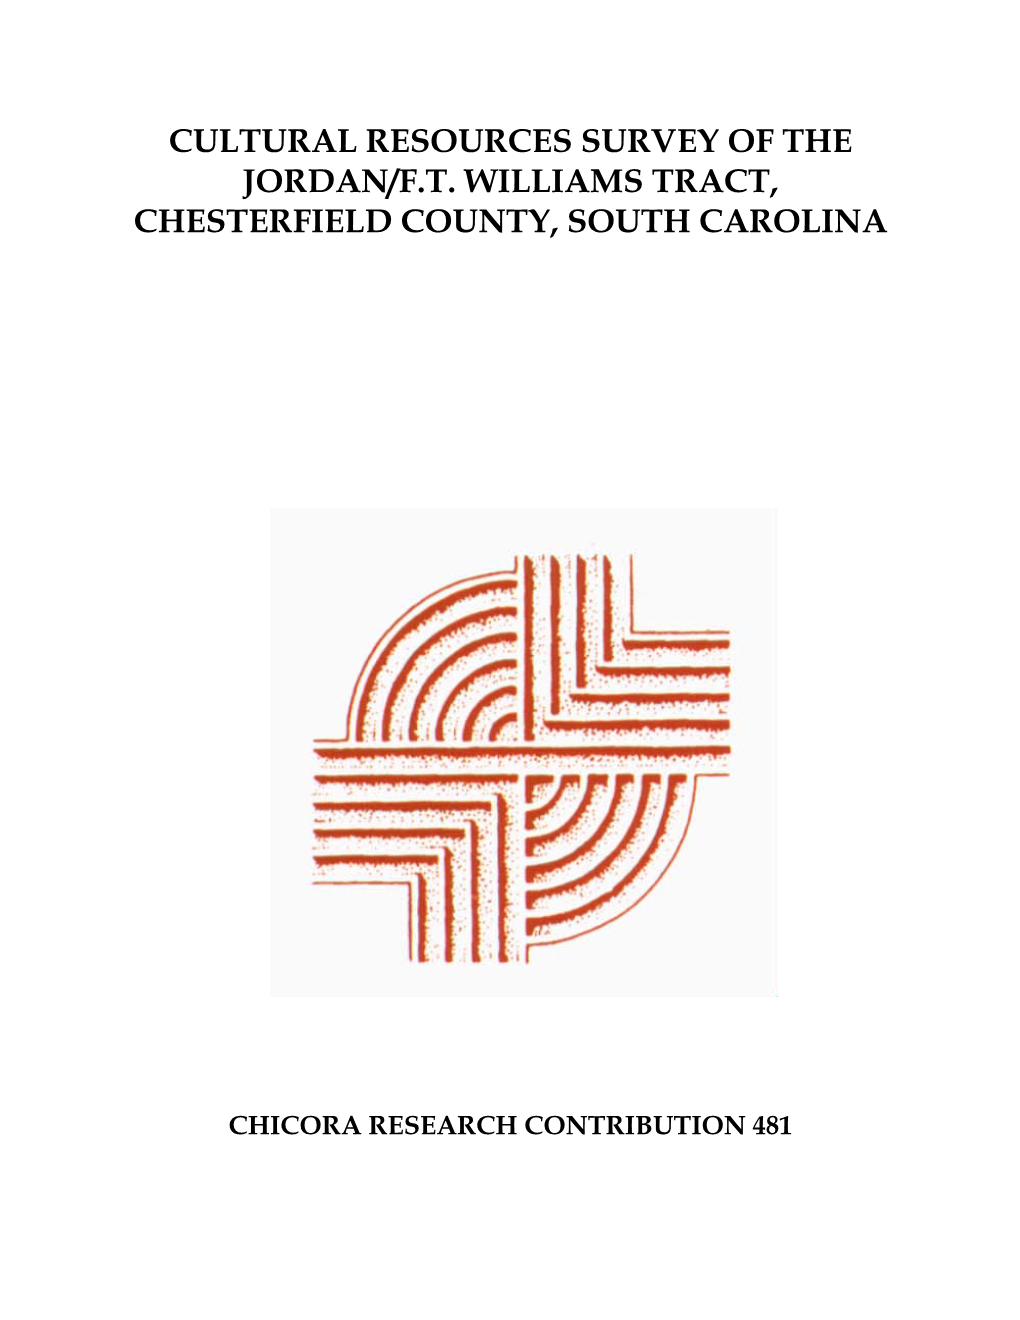 Cultural Resources Survey of the Jordan/F.T. Williams Tract, Chesterfield County, South Carolina